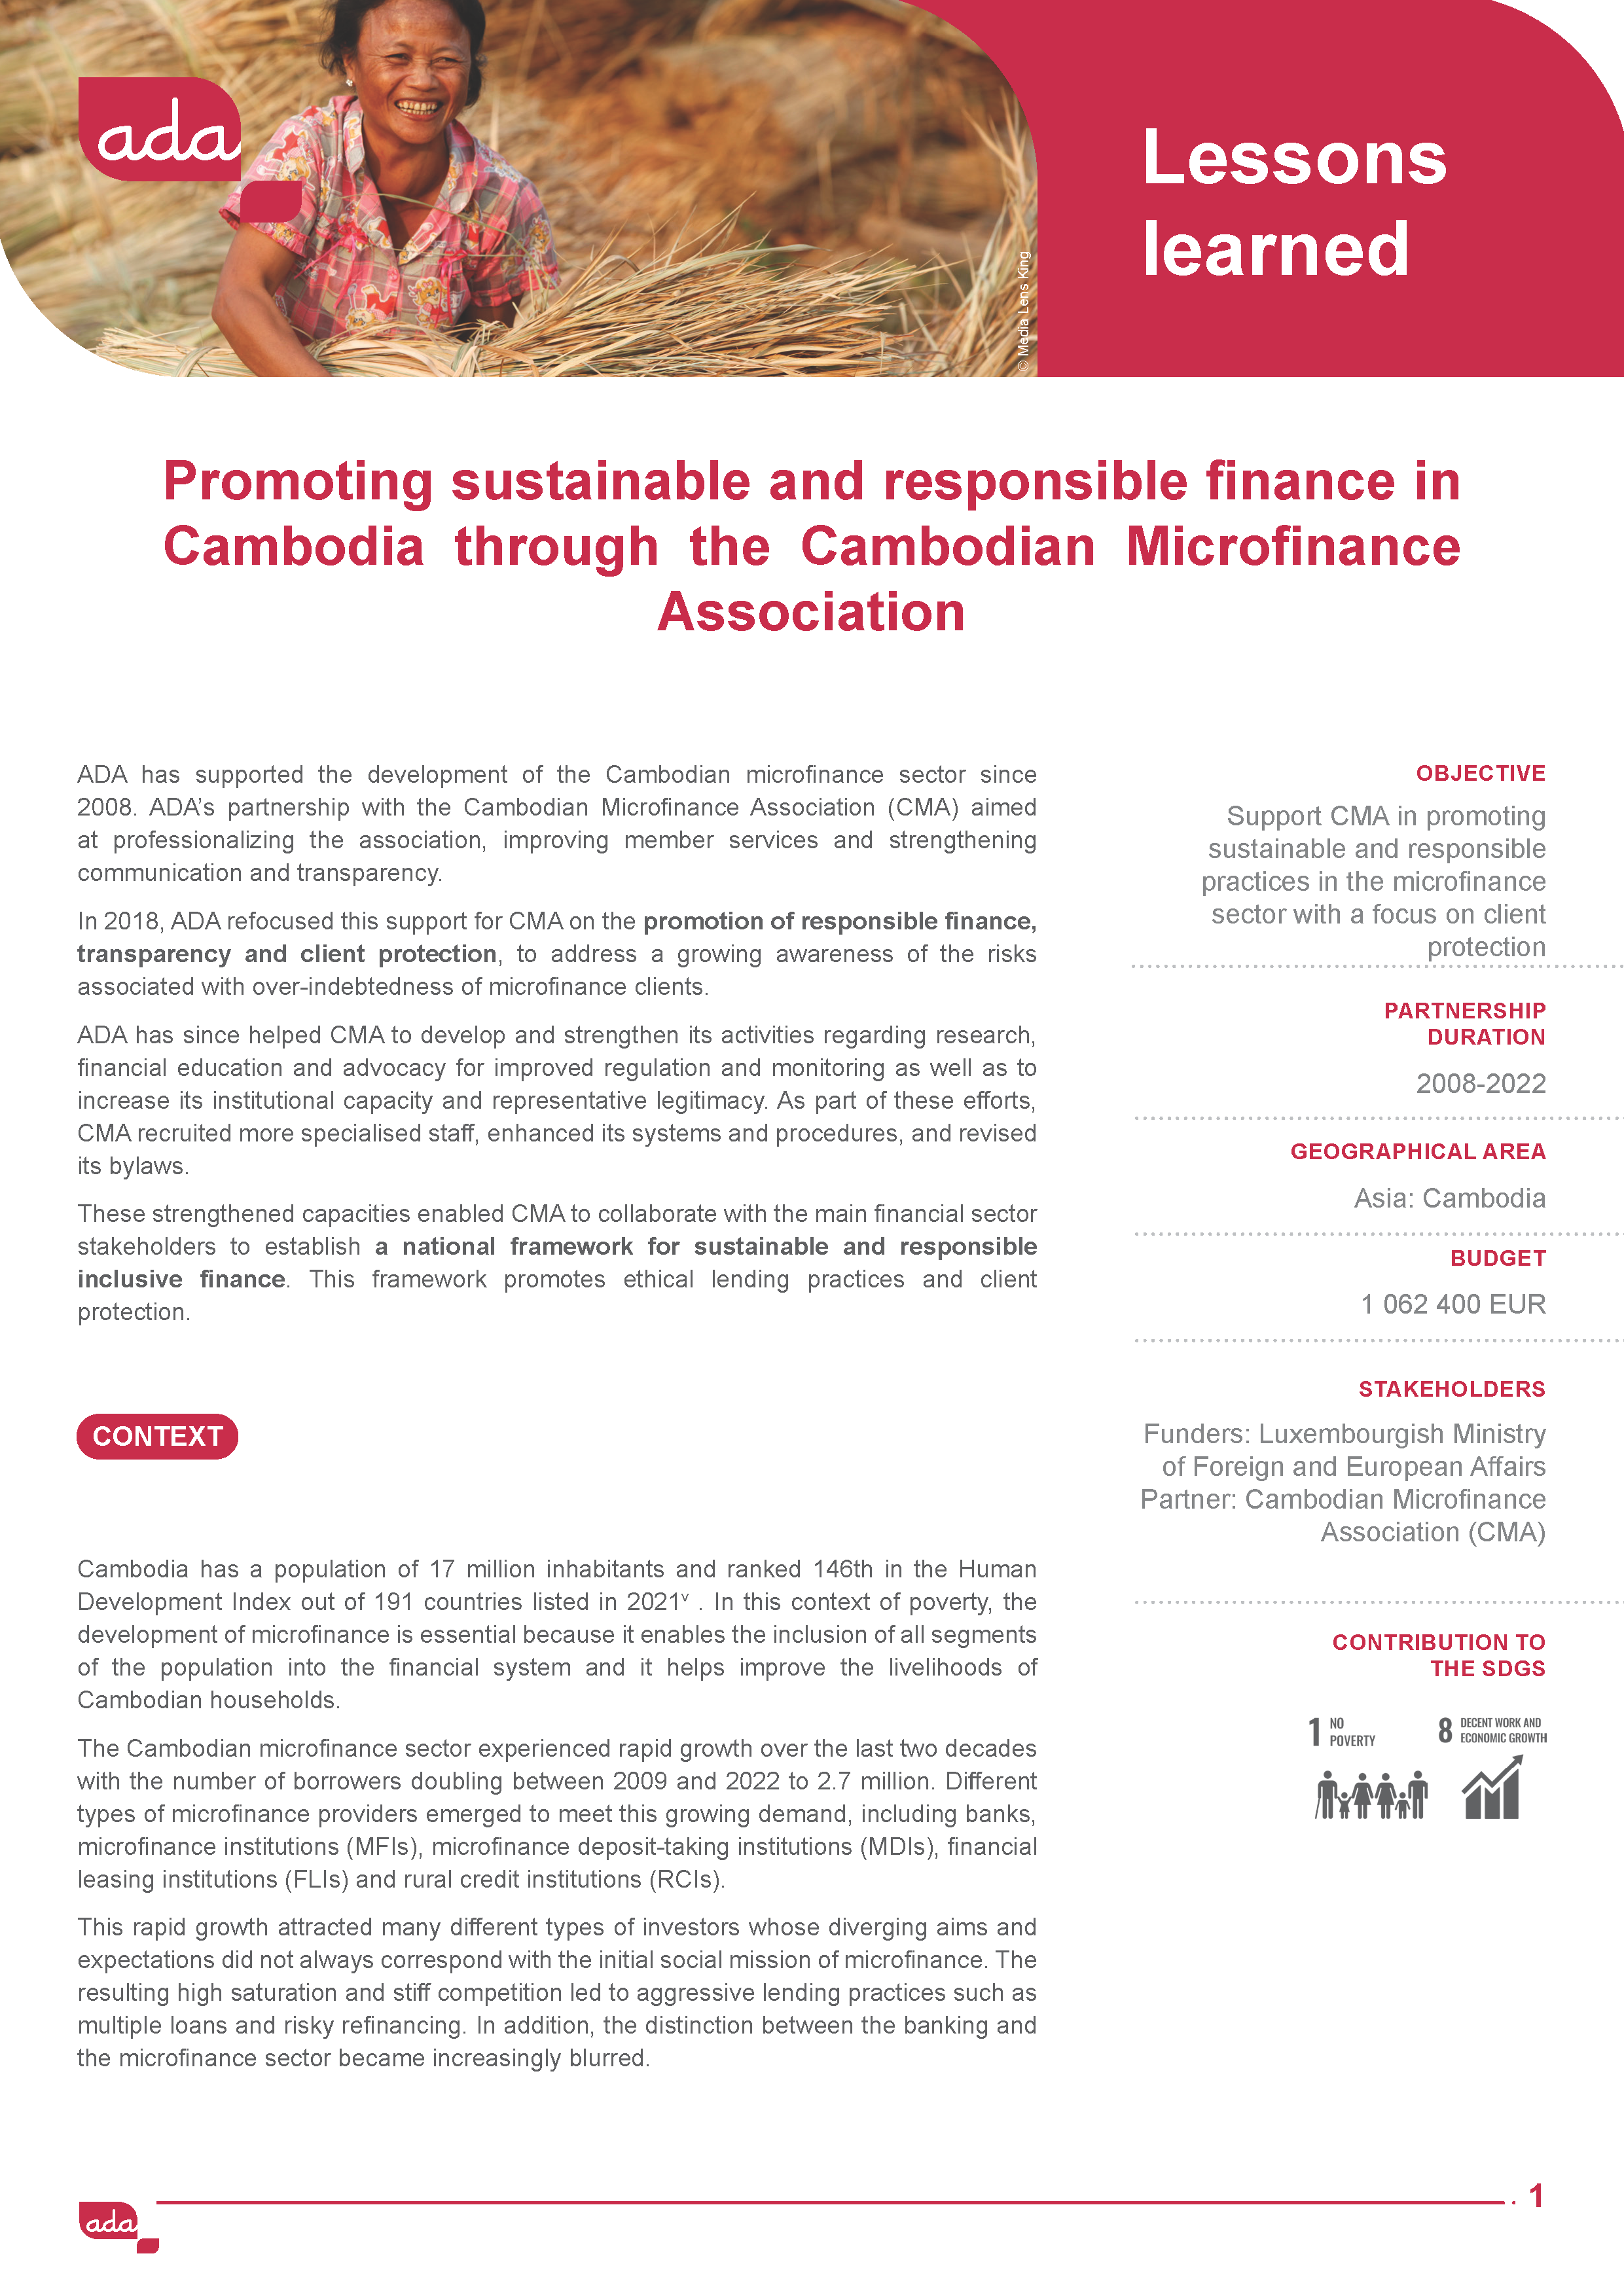 Promoting sustainable and responsible finance in Cambodia through the Cambodian Microfinance Association